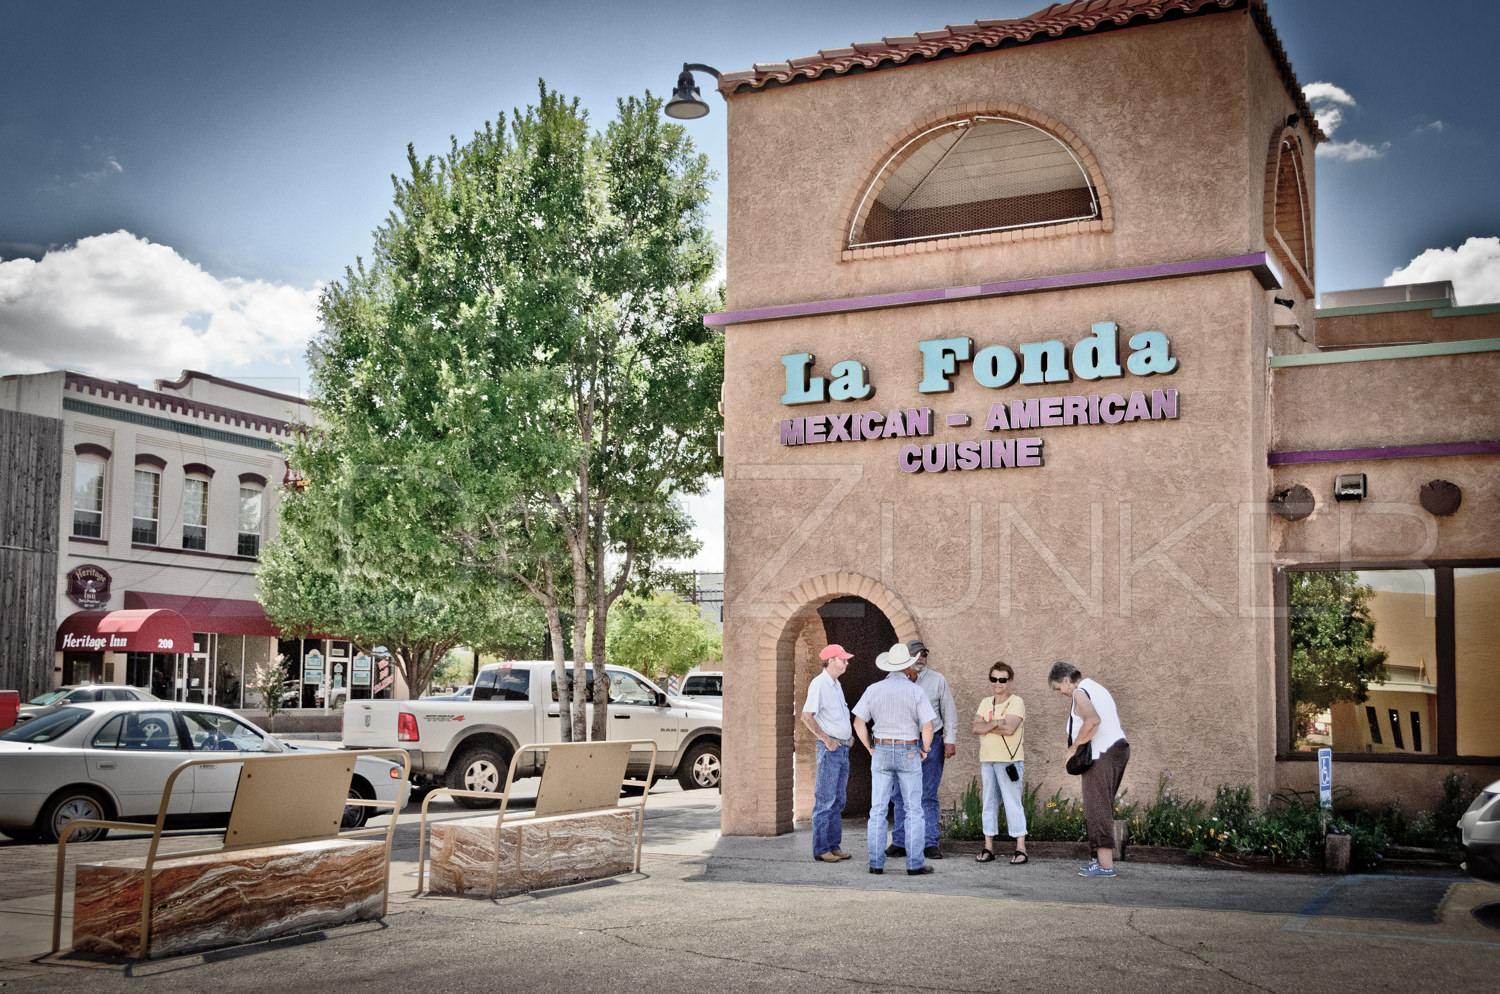 The best Mexican food from La Fonda Restaurant in Artesia, New Mexico Houston Commercial Architectural Photographer Dee Zunker